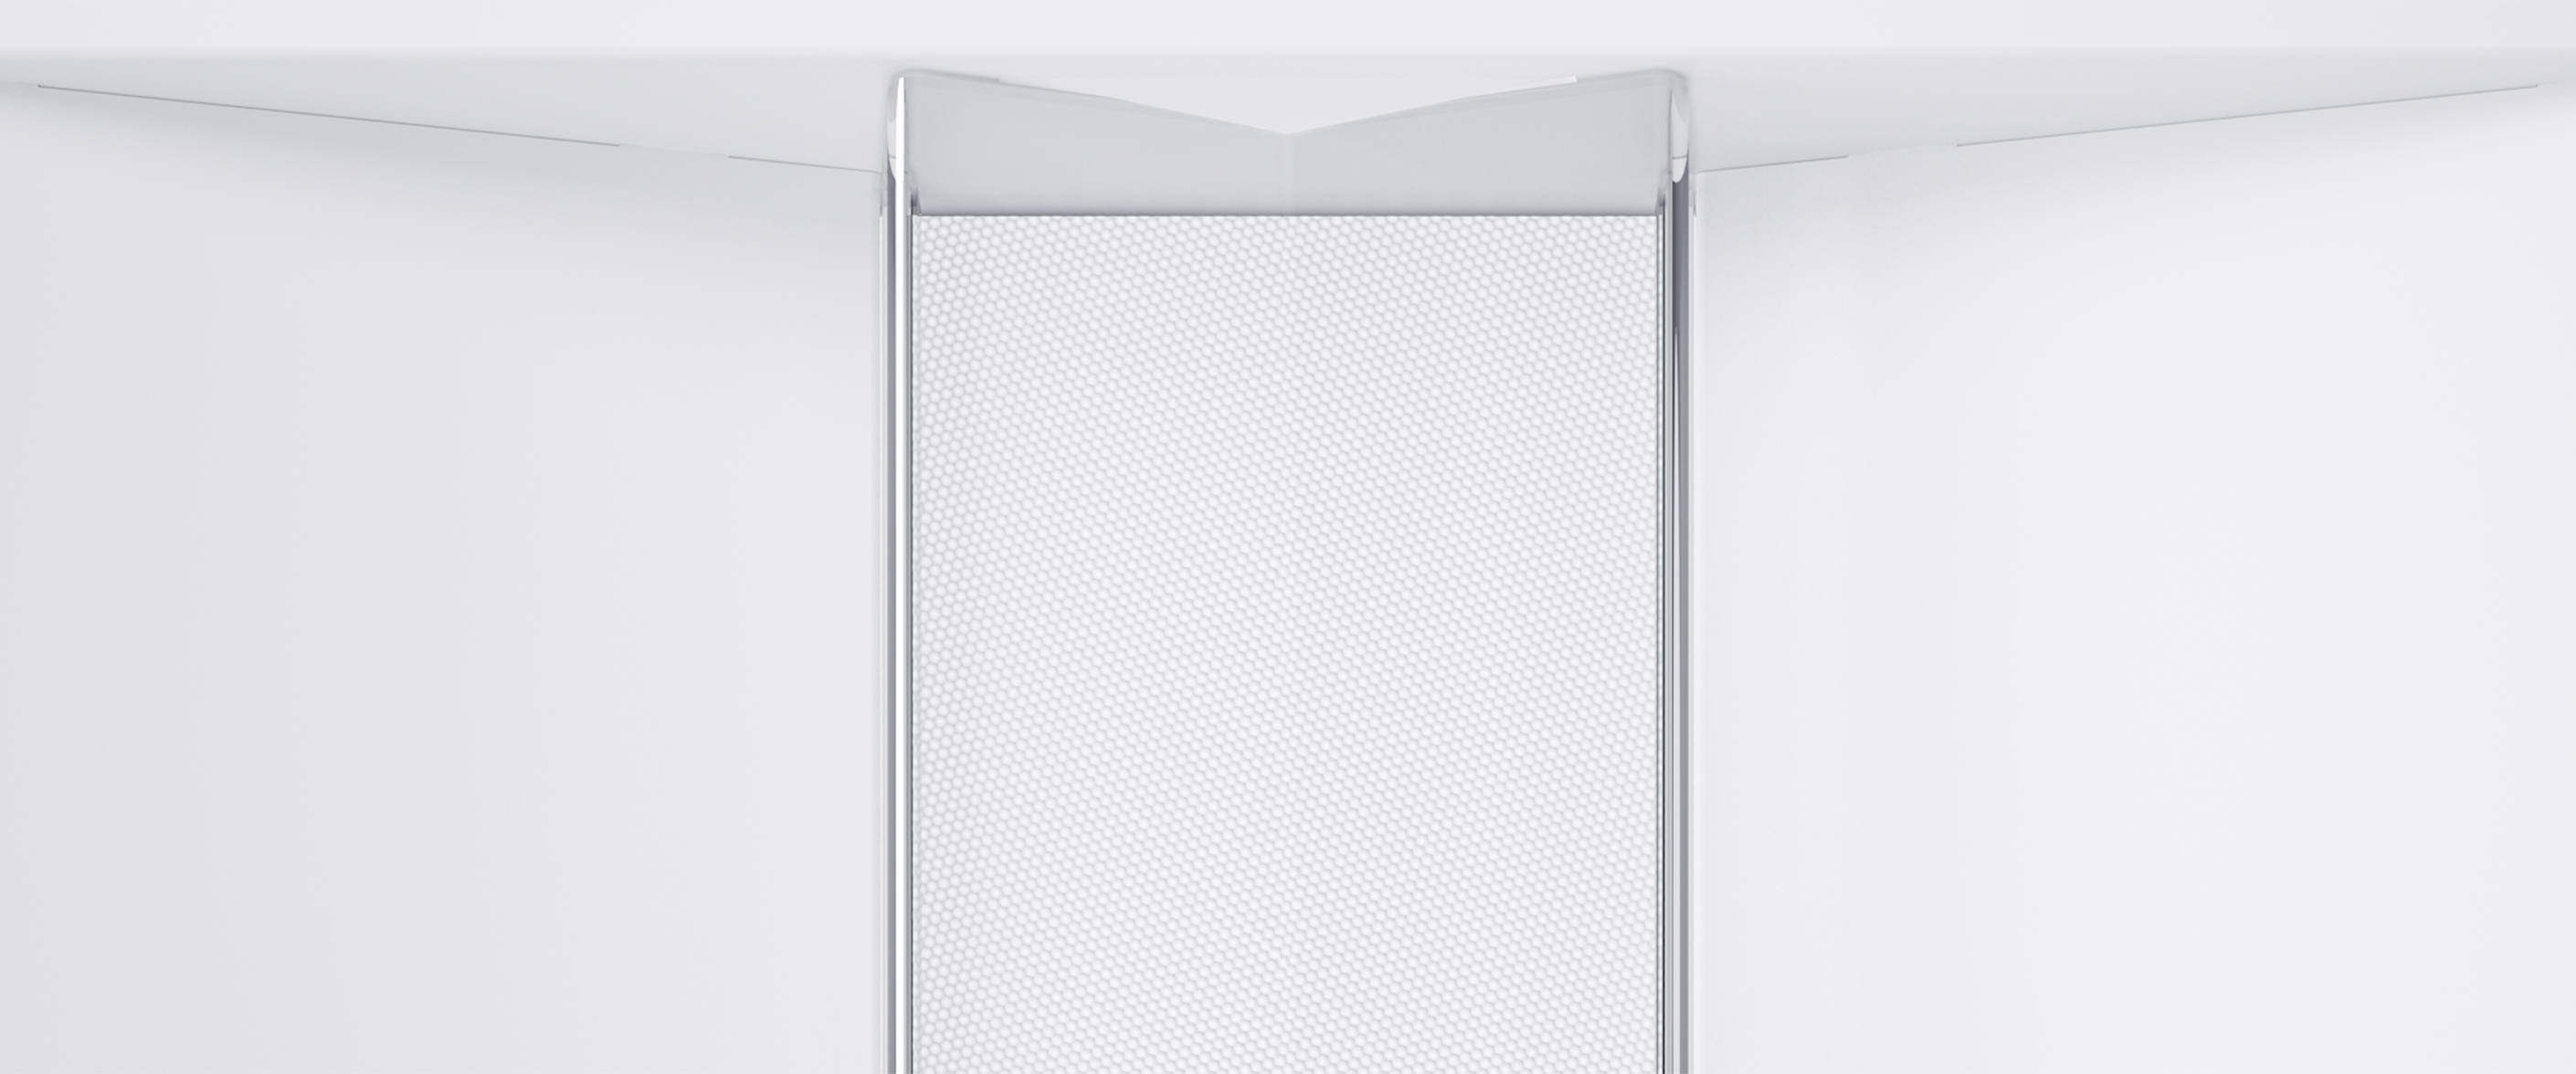 The delta louvre provides efficiency and optimal light comfort, light divider in acrylic distributes and spreads the light evenly in the reflector.